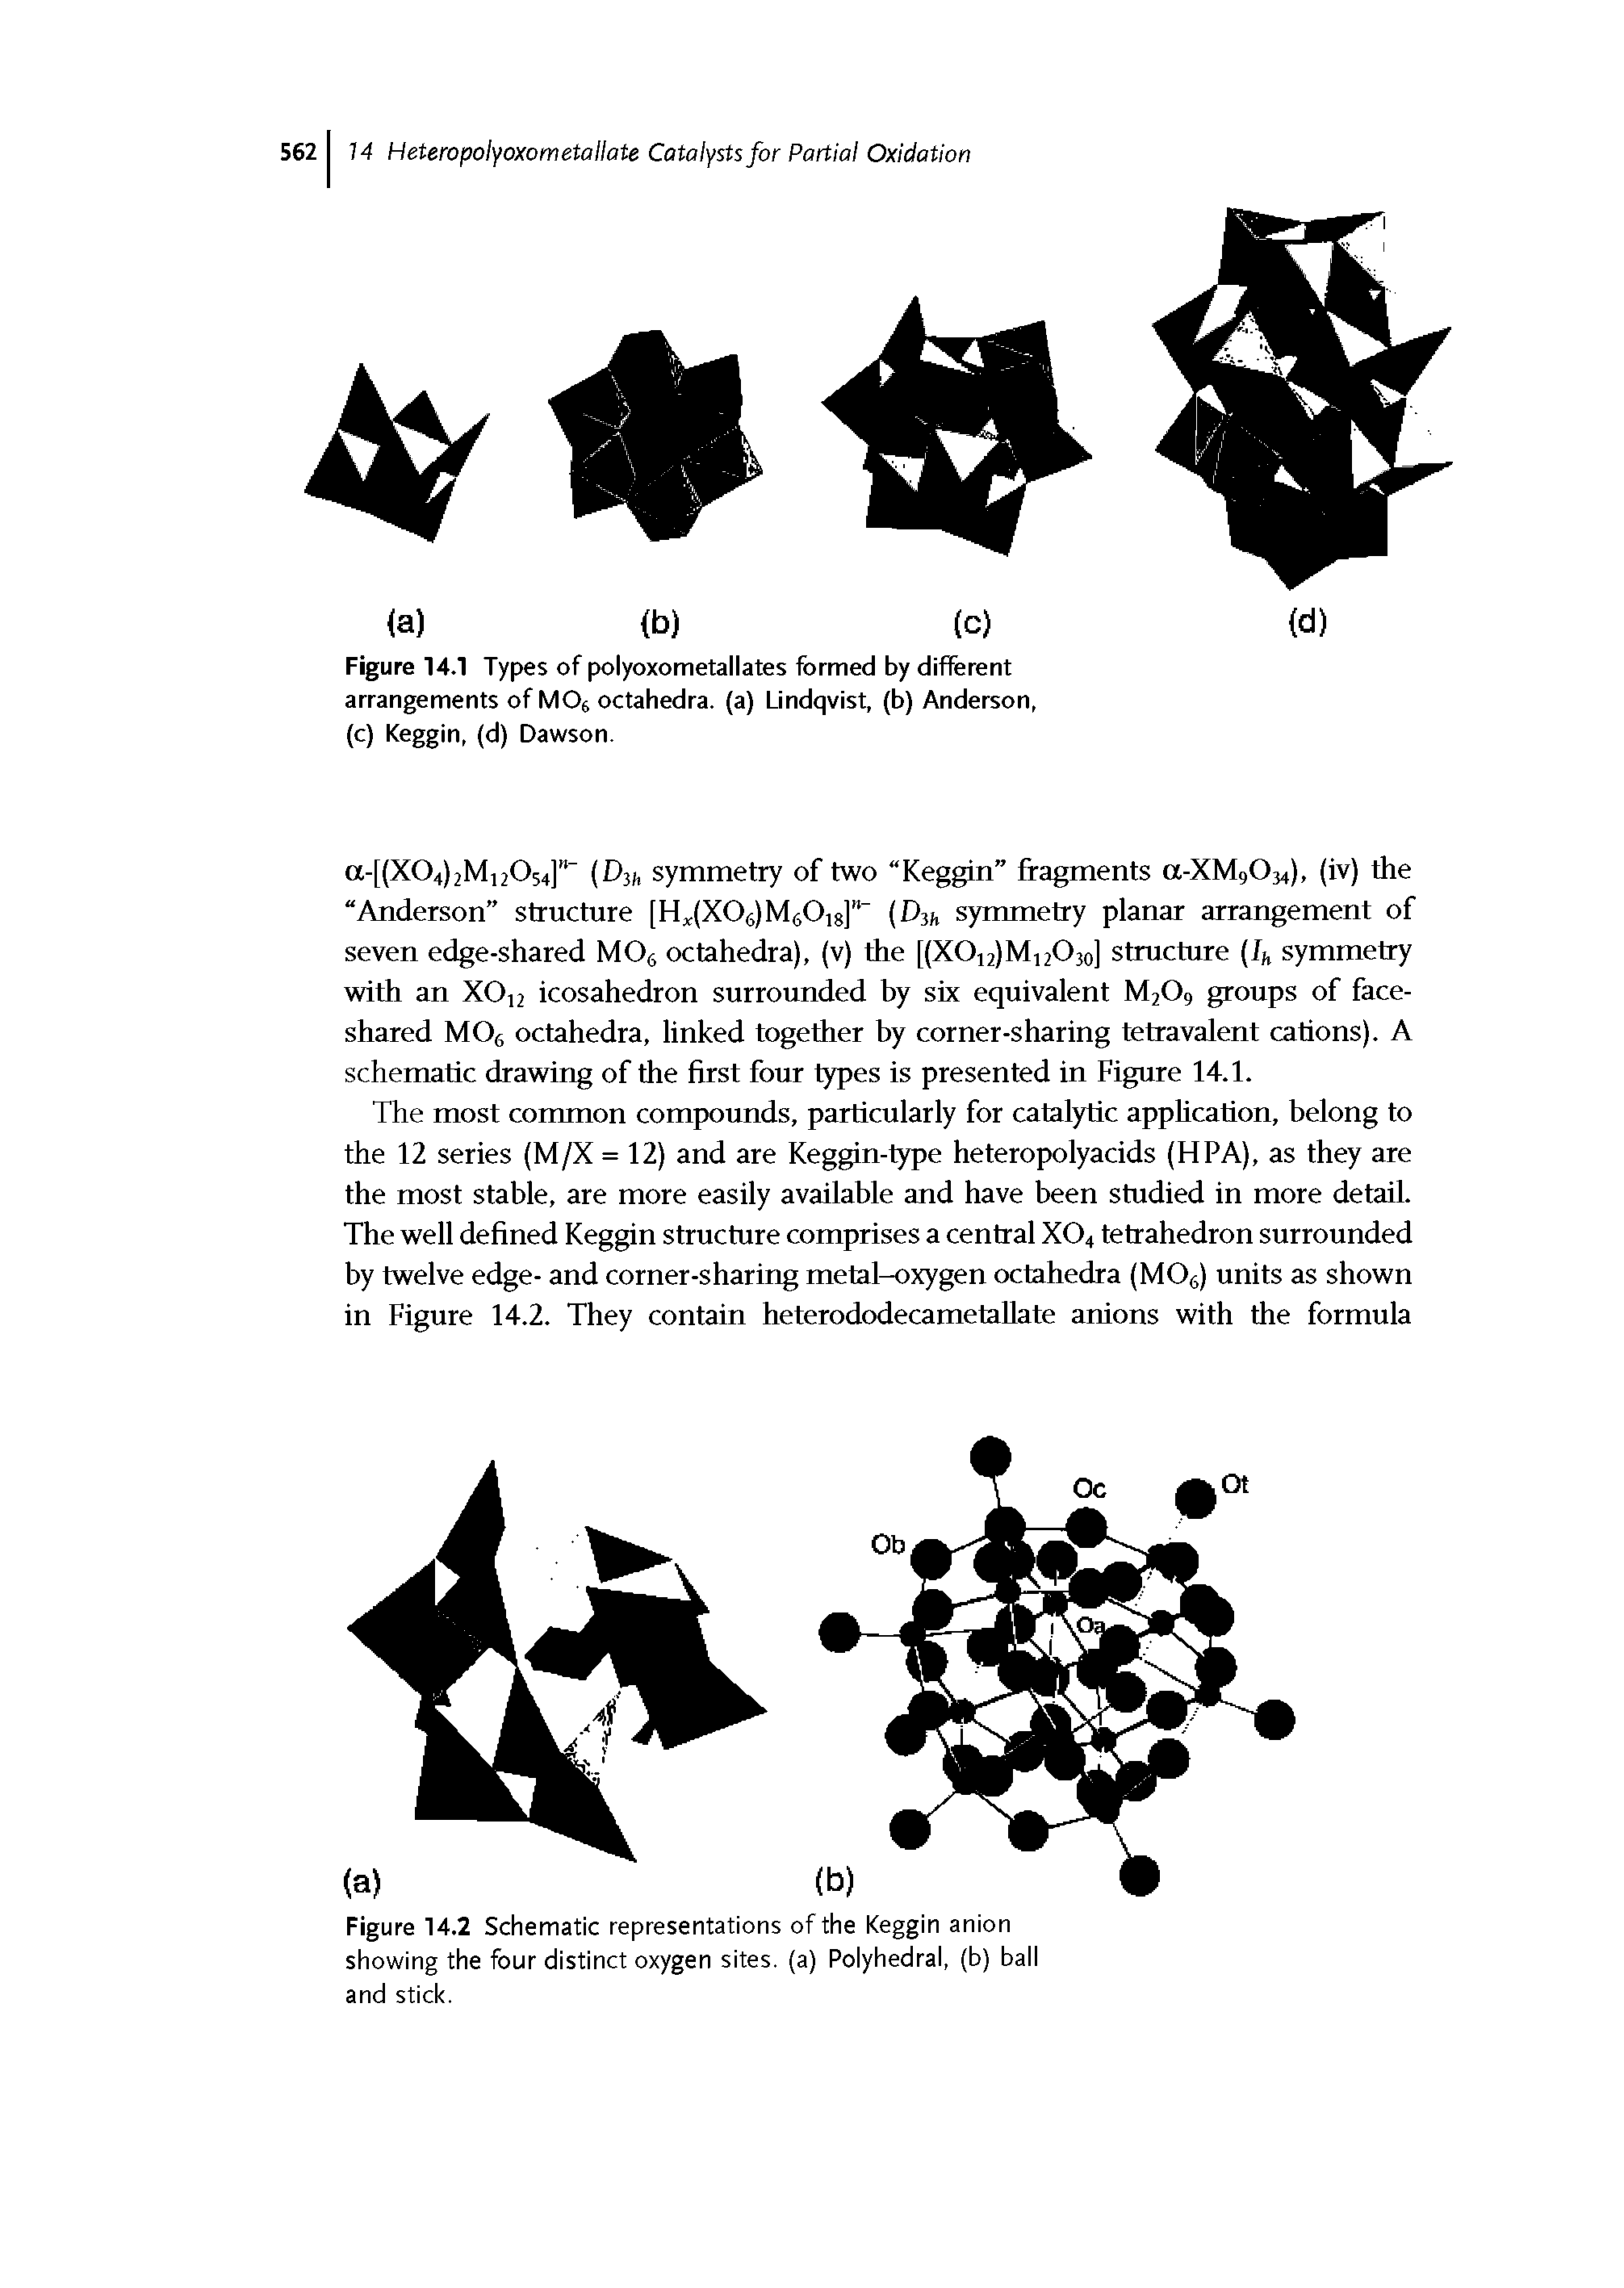 Figure 14.1 Types of polyoxometallates formed by different arrangements of MOs octahedra. (a) Lindqvist, (b) Anderson, (c) Keggin, (d) Dawson.